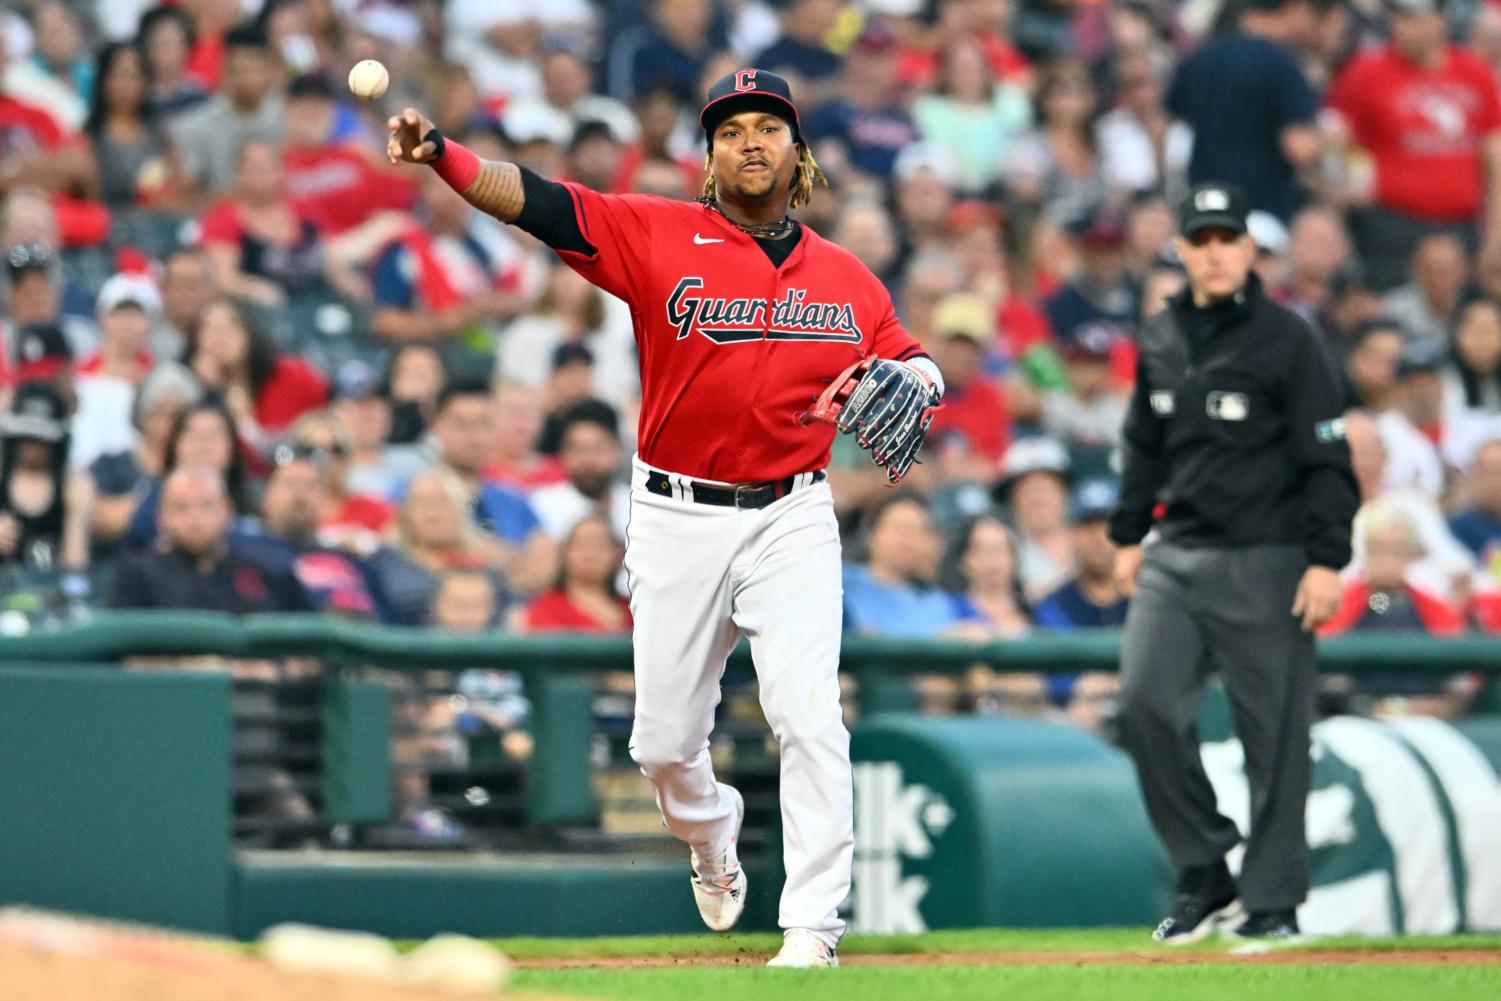 Big stick: Lindor focused on season, not future in Cleveland